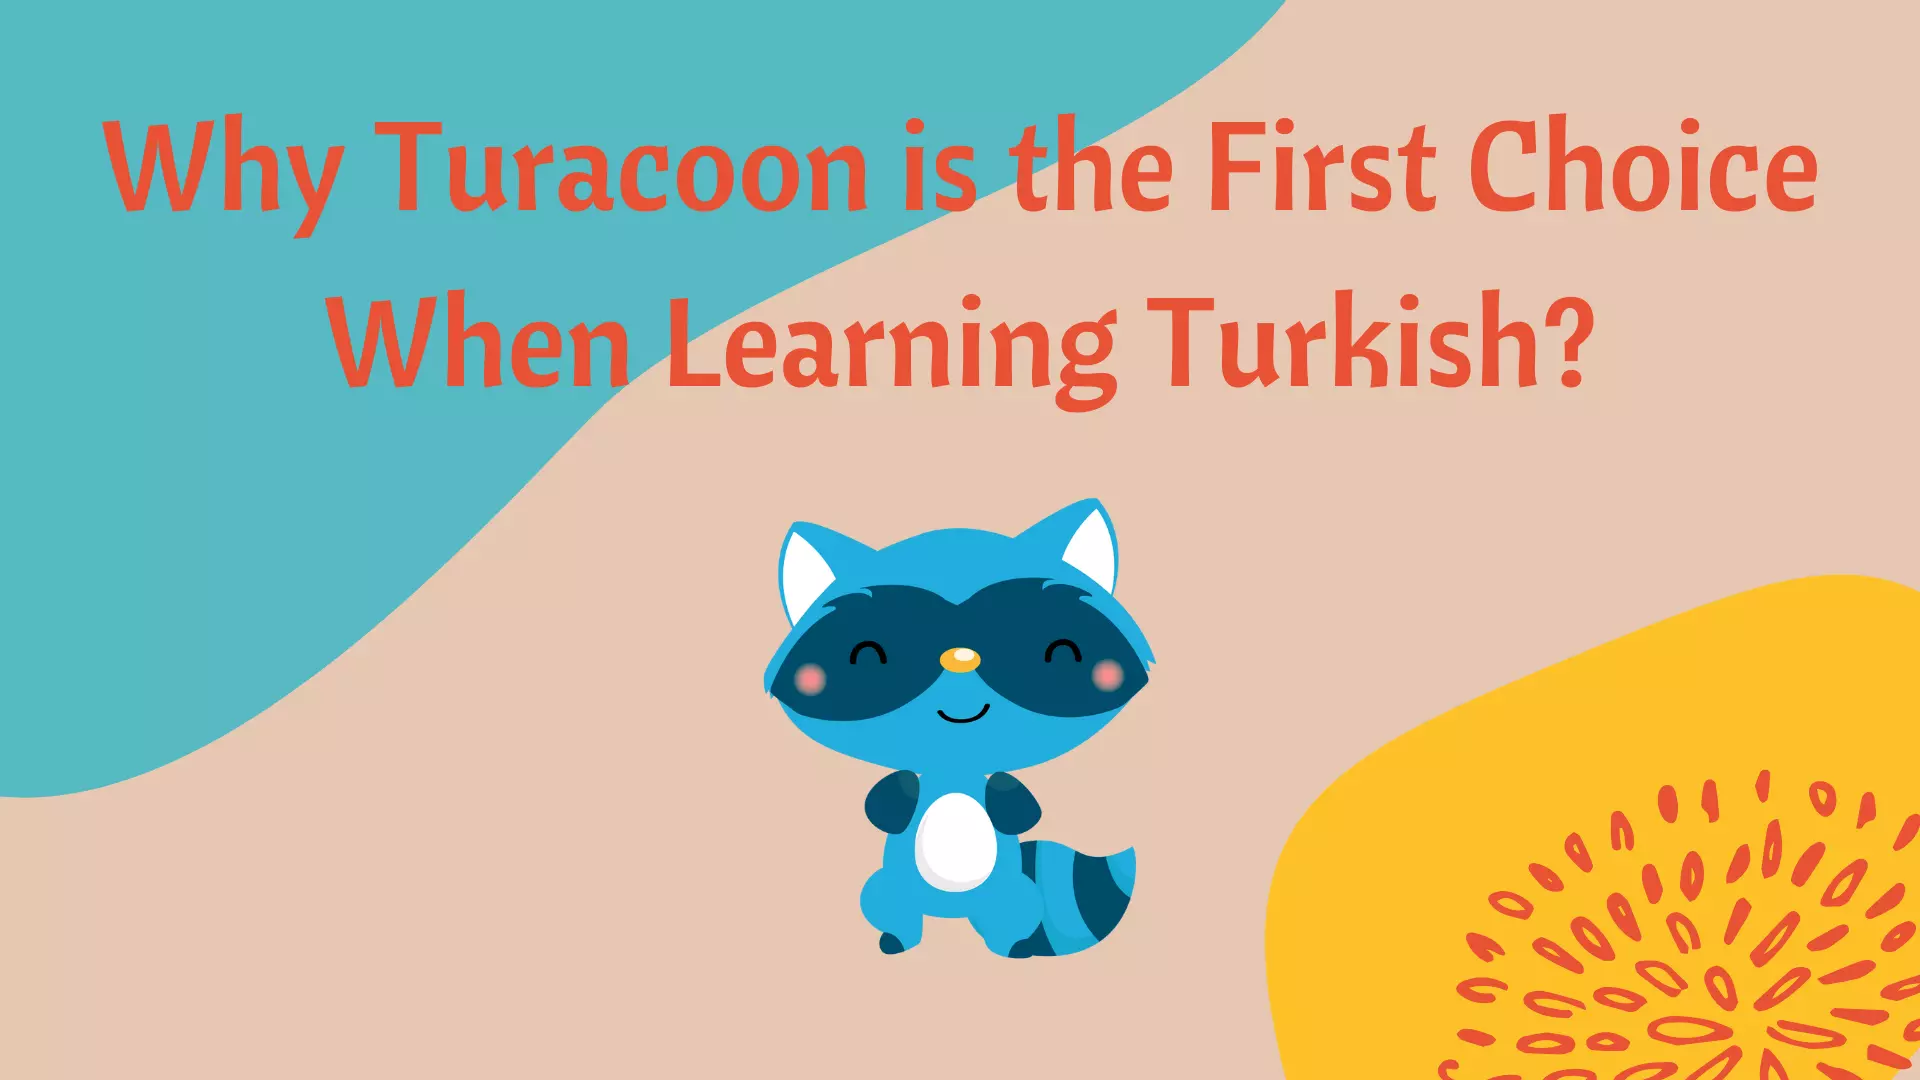 Why Should I Learn Turkish with the Turacoon?